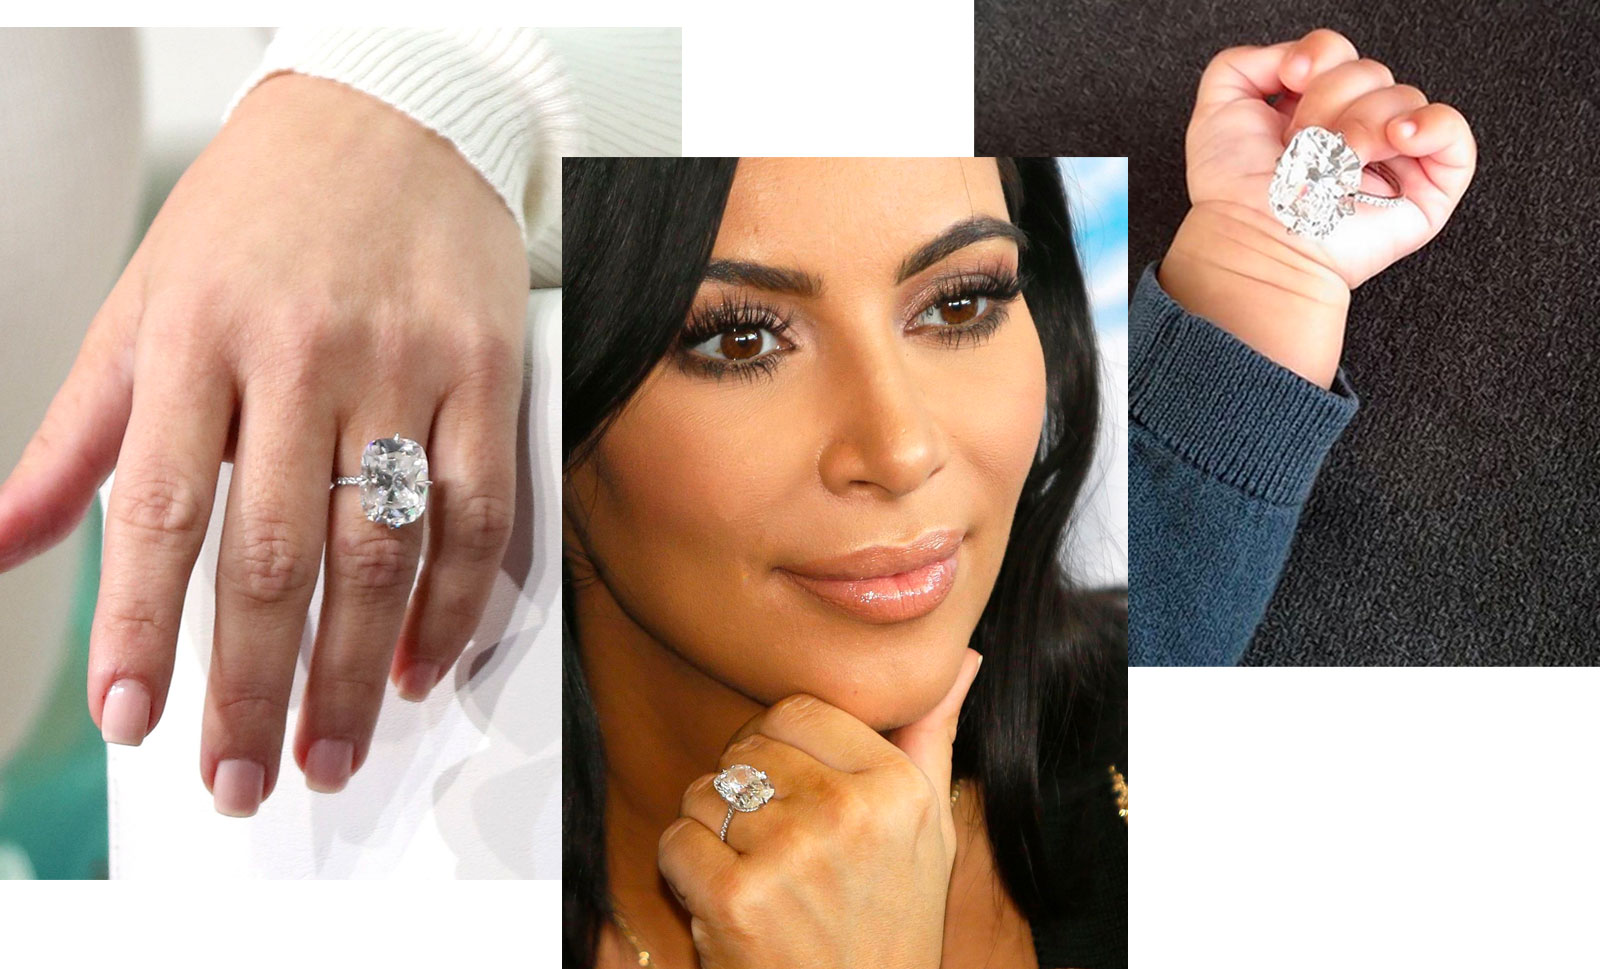 Kim Kardashian's cushion-cut engagement ring was purchased to replace the 15 carat emerald-cut engagement ring stolen from her in Paris in 2016